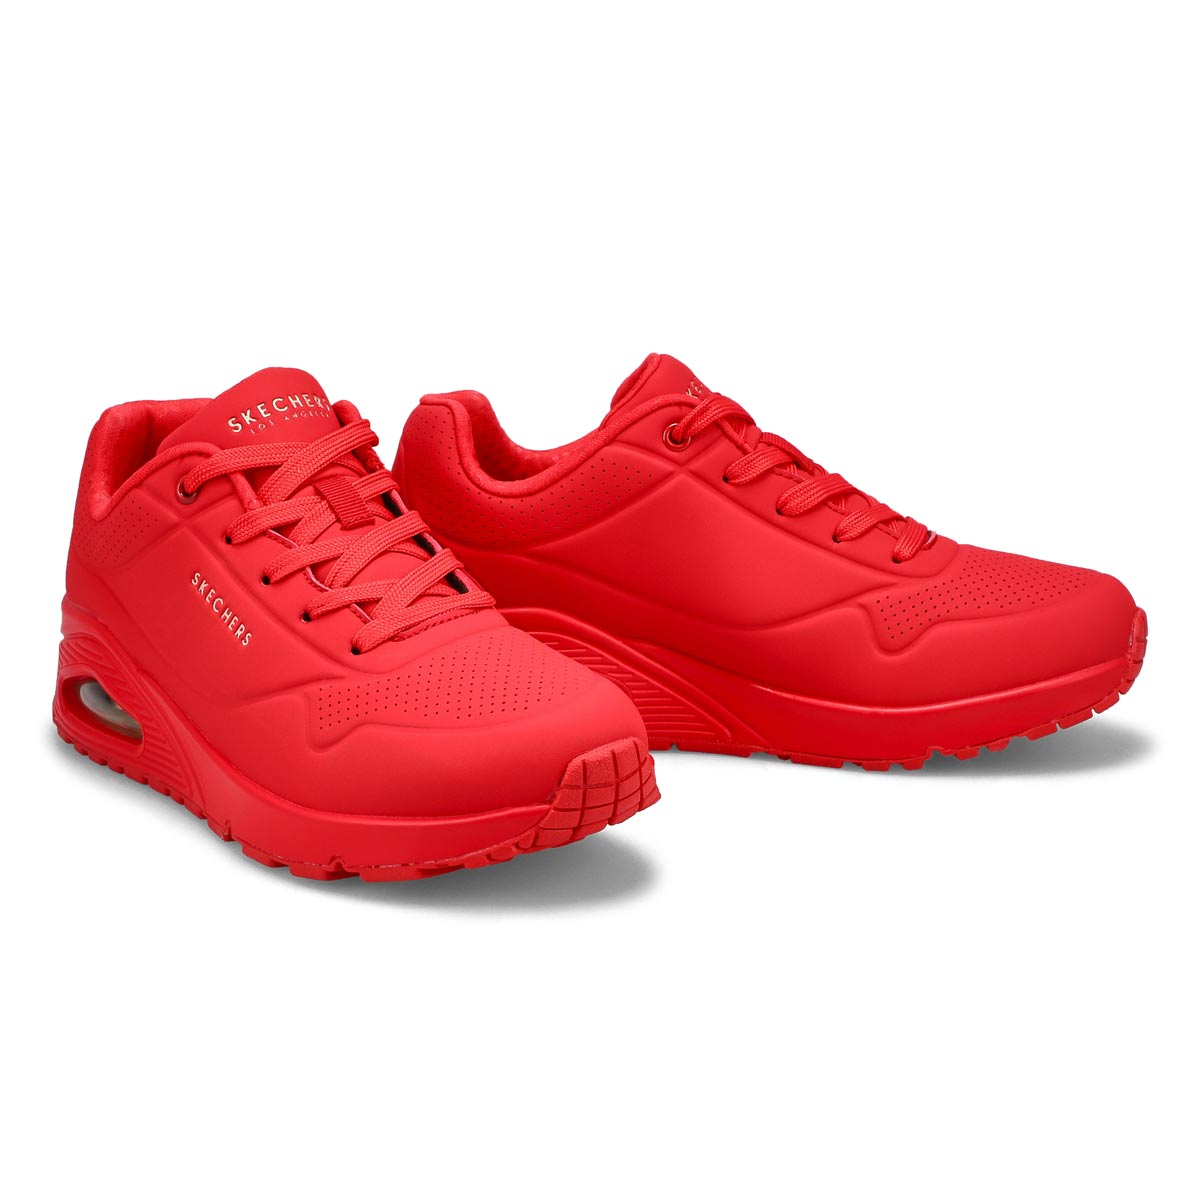 red skechers tennis shoes